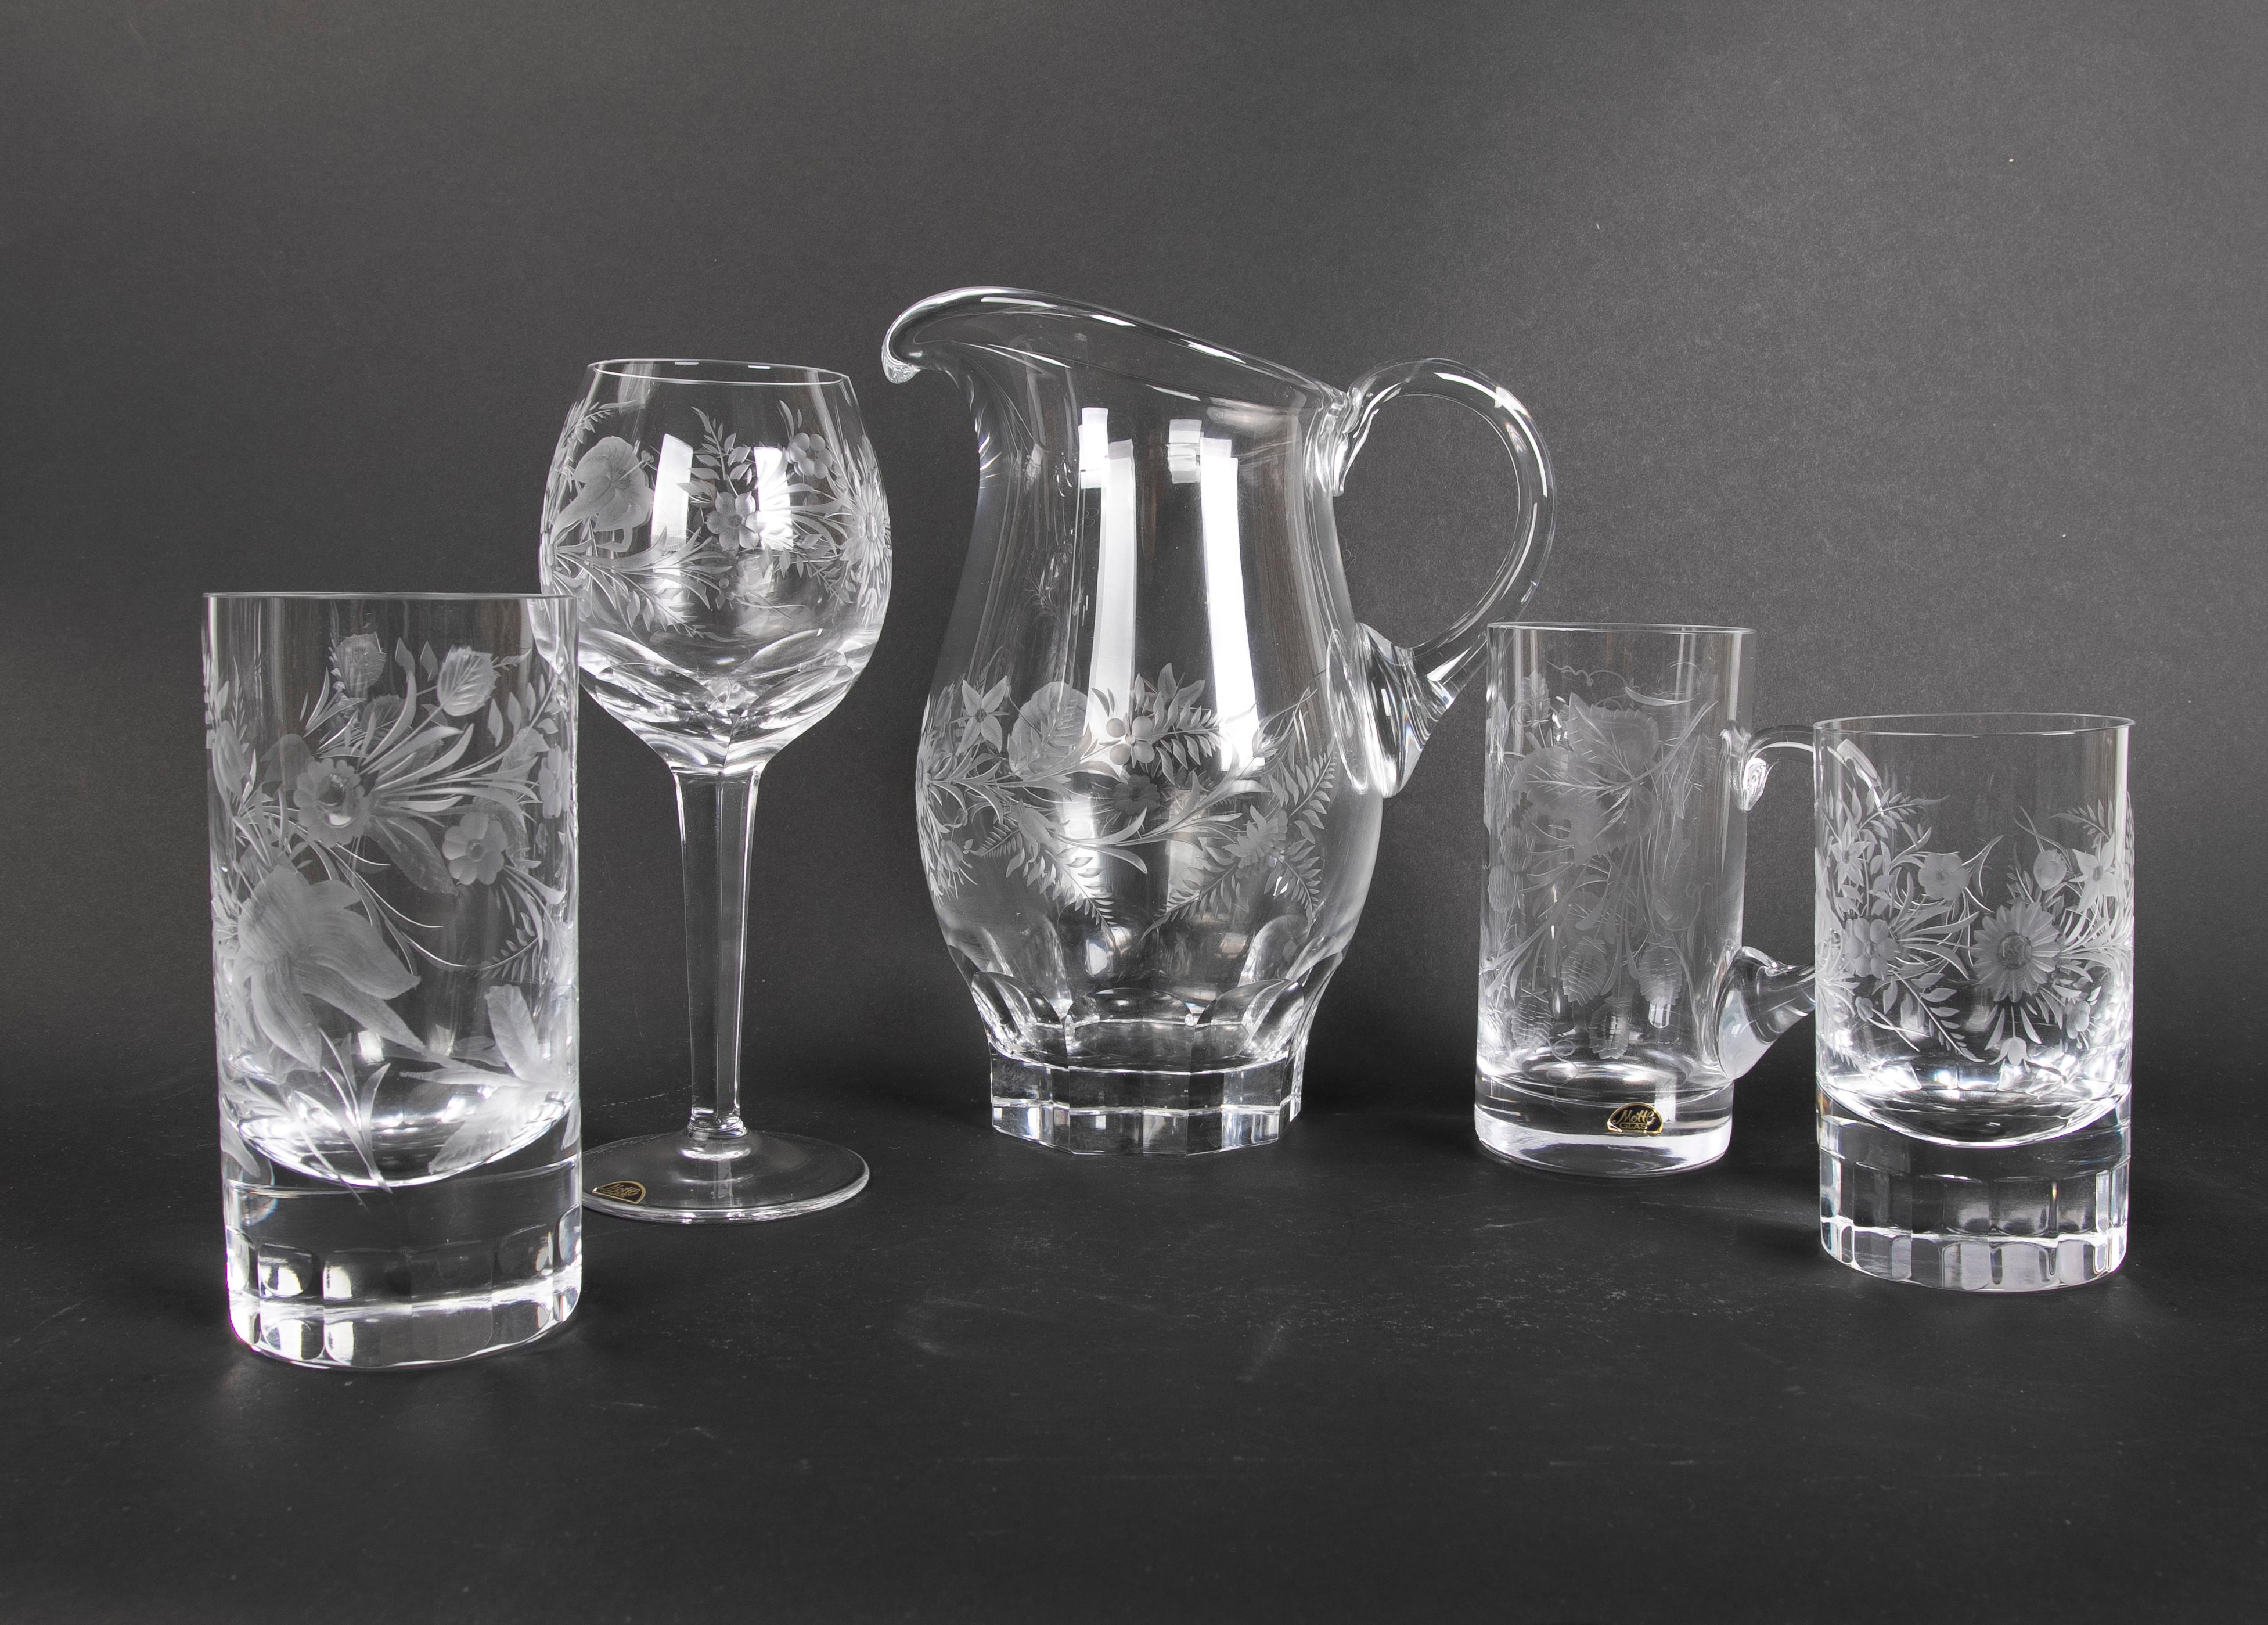 Glassware Composed of seventy-two pieces of cut Bohemian Crystal
The quantities are as follows:
- 1 Jug of water
- 29 Glasses
- 16 Jugs
- 11 Medium glasses
- 18 Small glasses.
   